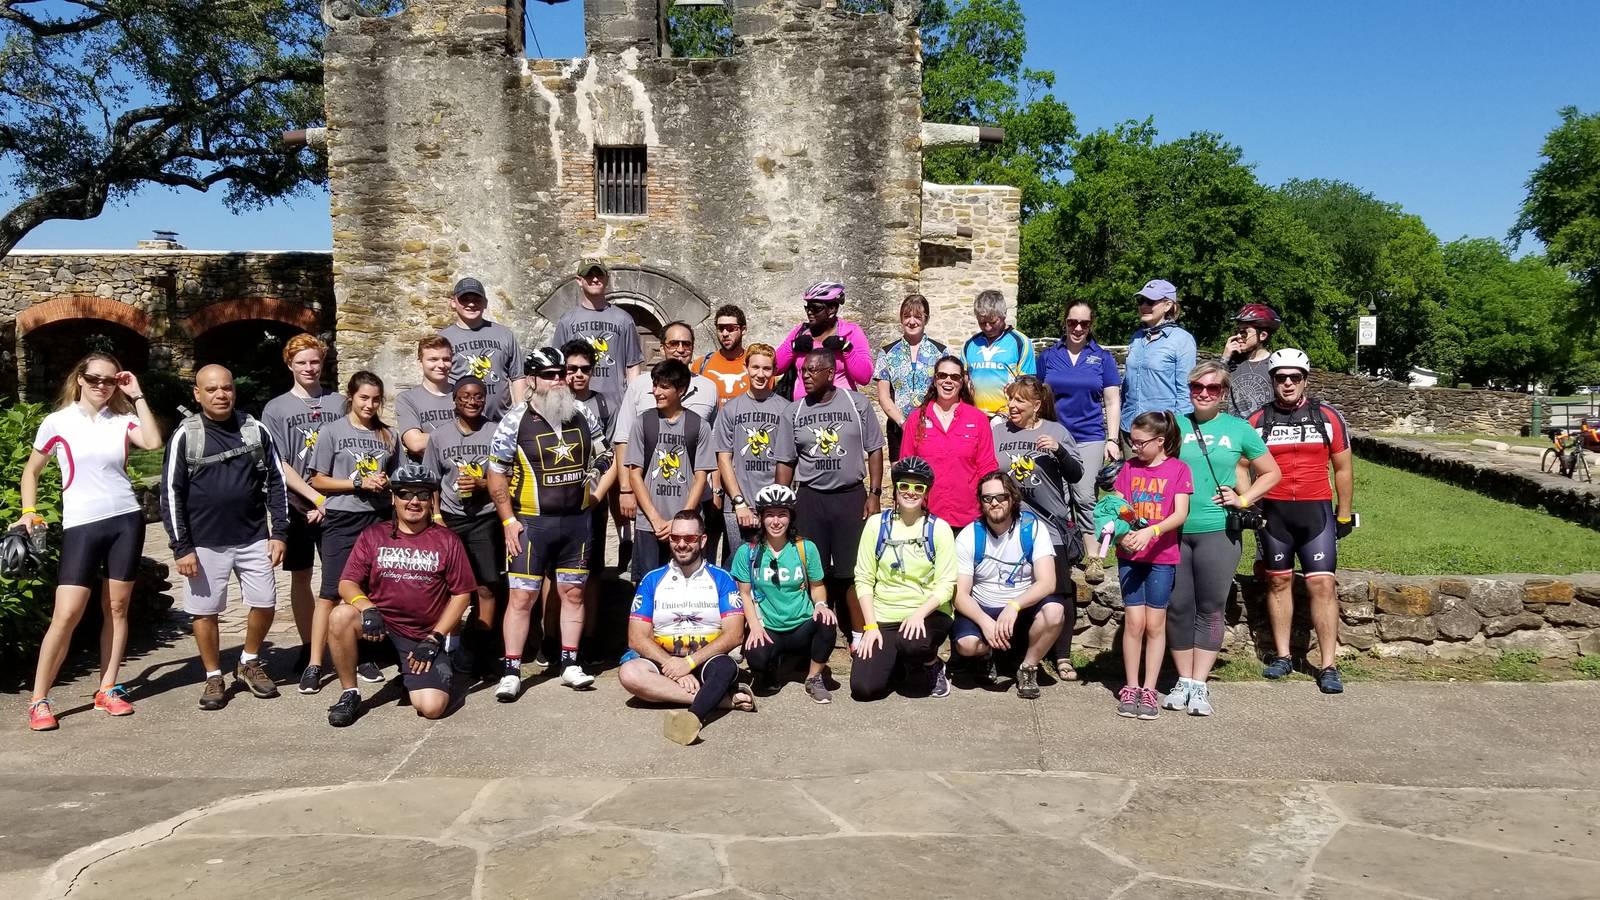 <p>NPCA holds annual biking events in Texas for the veteran community. This 2018 ride took place at San Antonio Missions National Historical Park.</p>